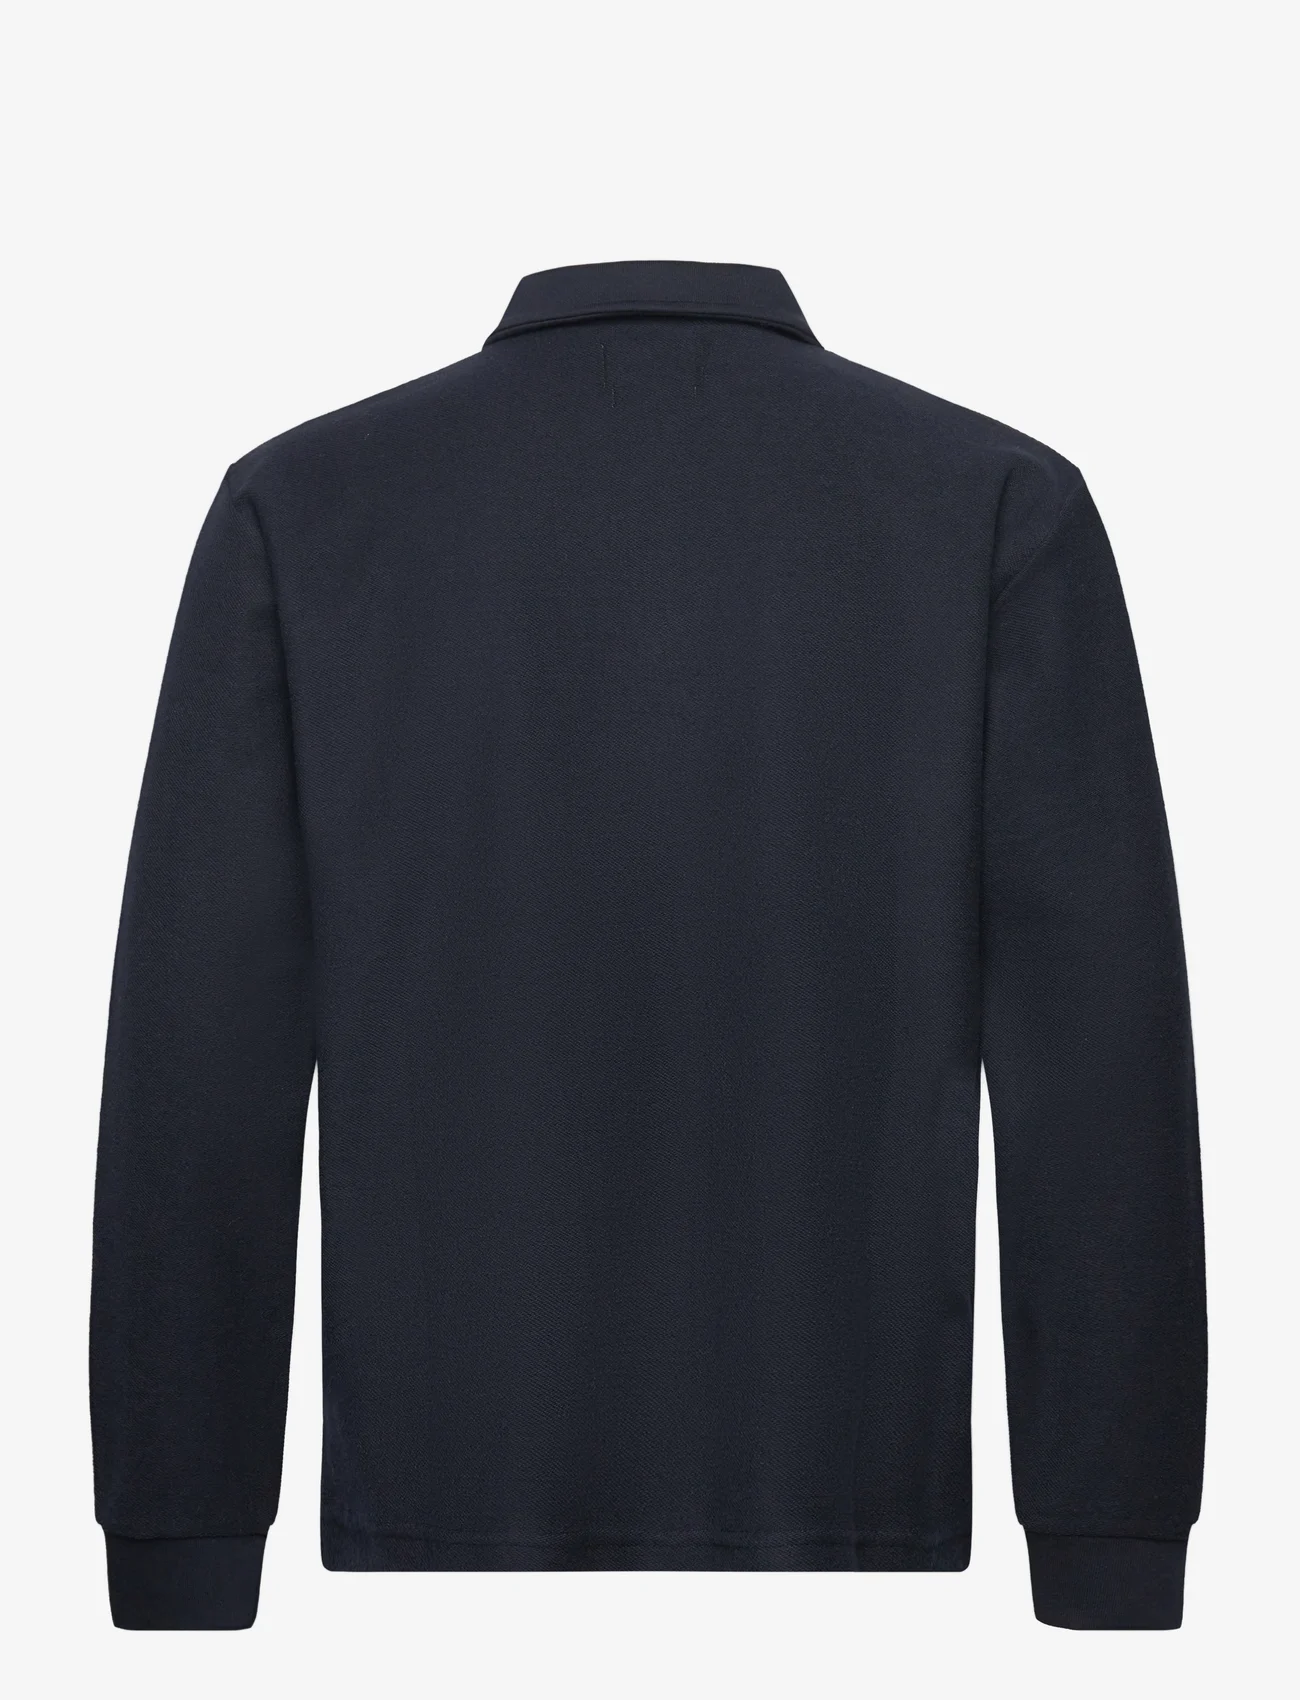 Woodbird - Alter Polo Sweat - knitted polos - navy - 1